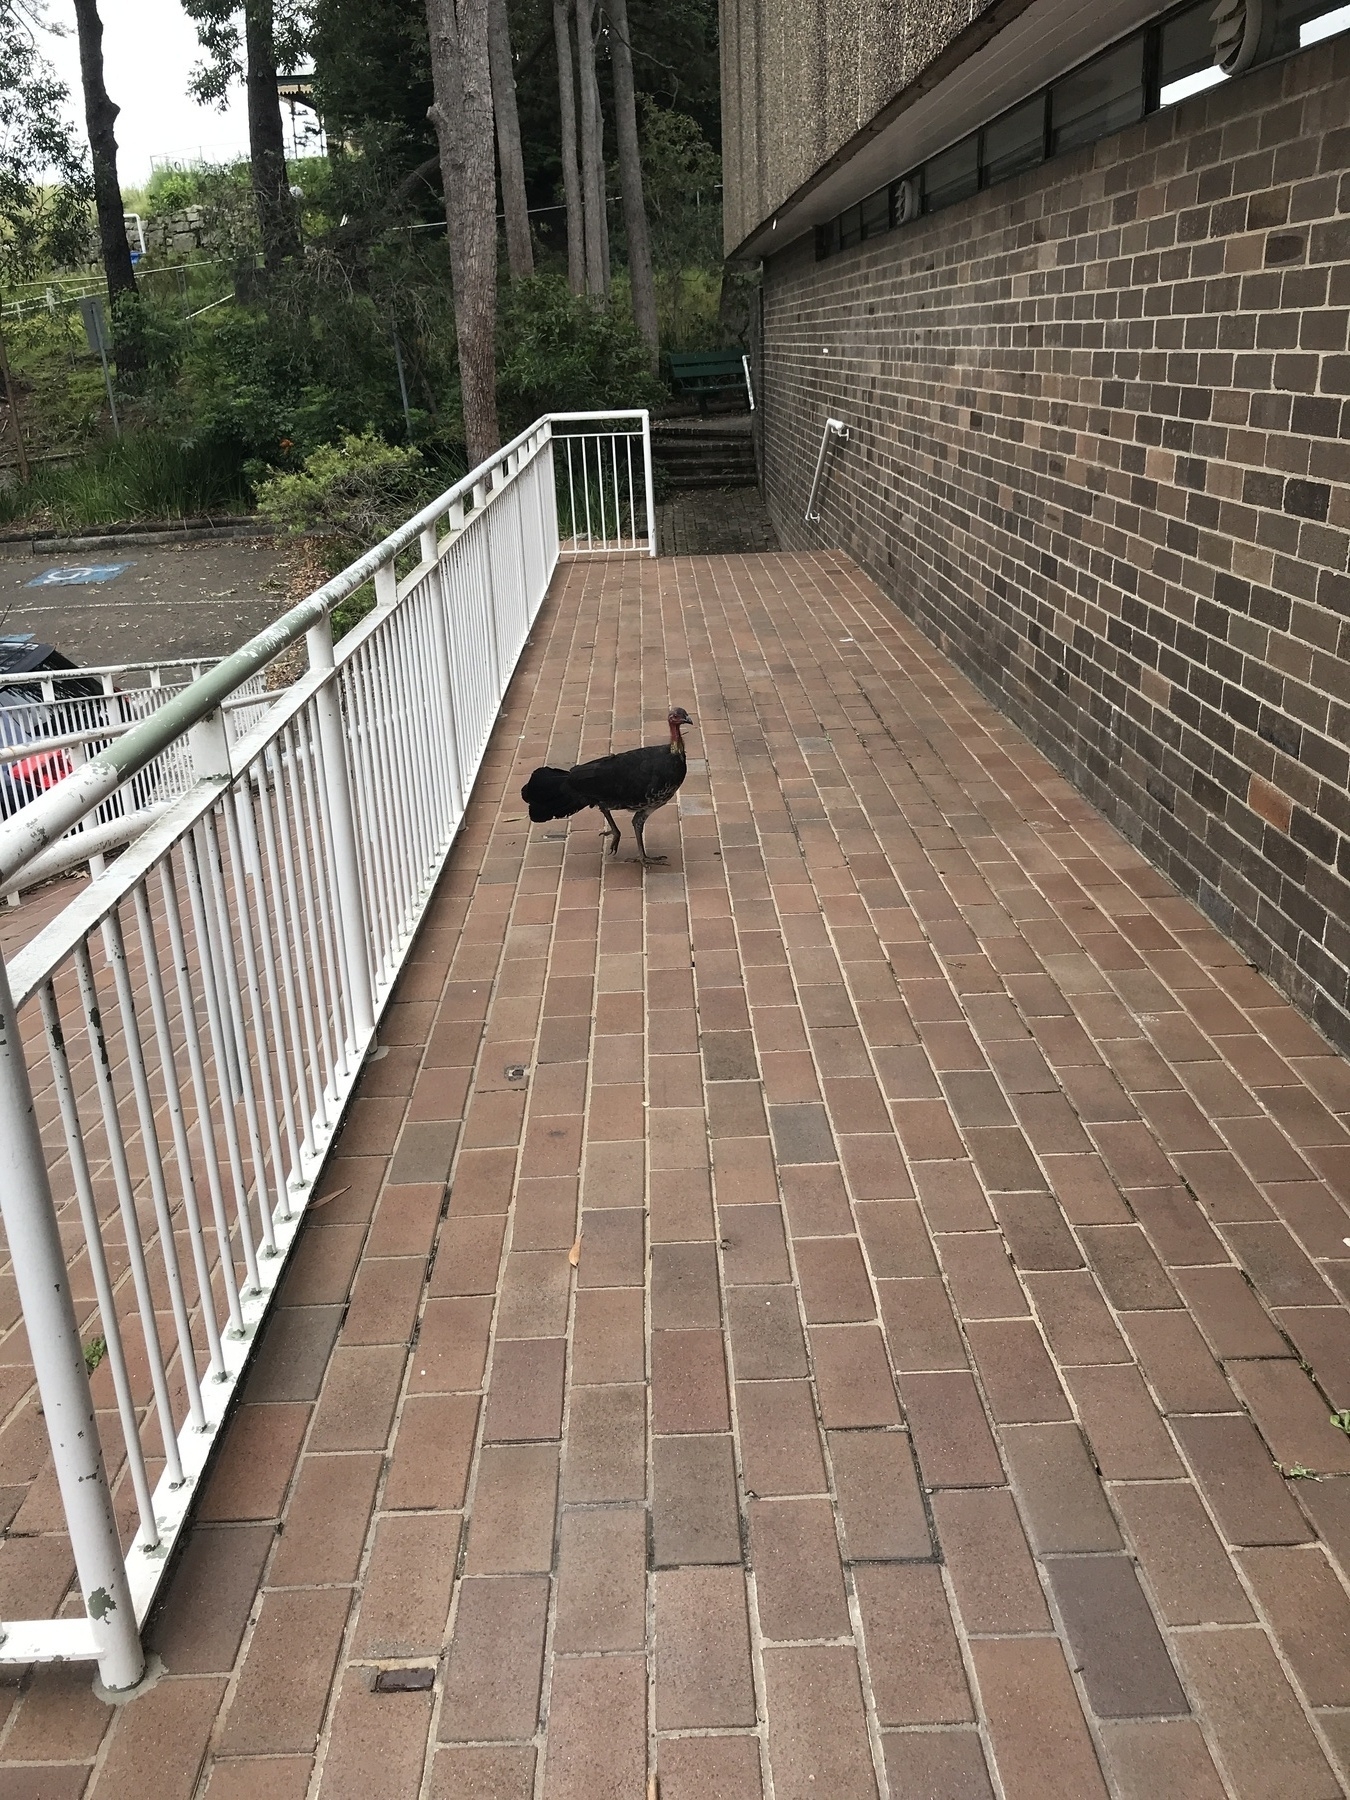 A Sydney bush turkey stands on a brick path between a white railing and a brick wall.